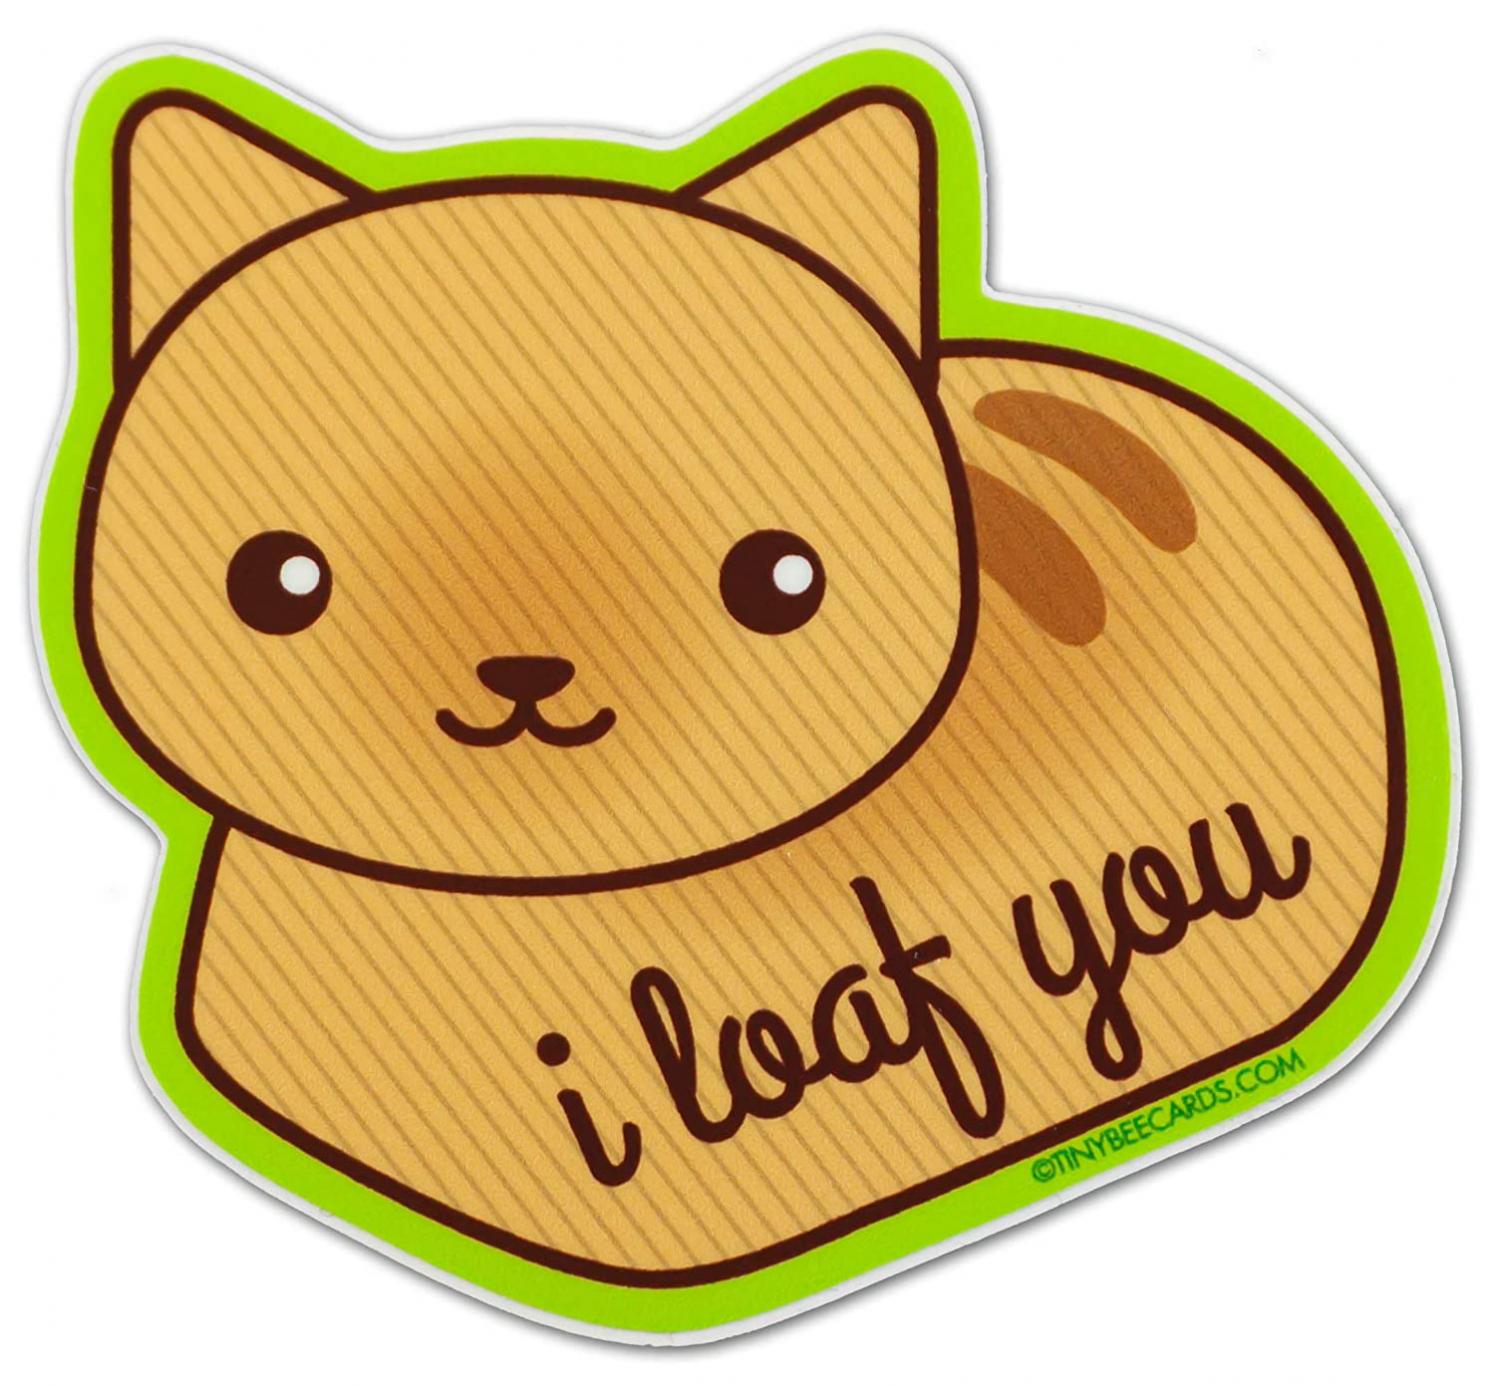 Cute Cat Vinyl Sticker"I Loaf You" - Bread Cat Loaf Decal Gift for Cat Lovers, Funny 3x3 Water Bottle or Laptop Sticker, Dishwasher Safe